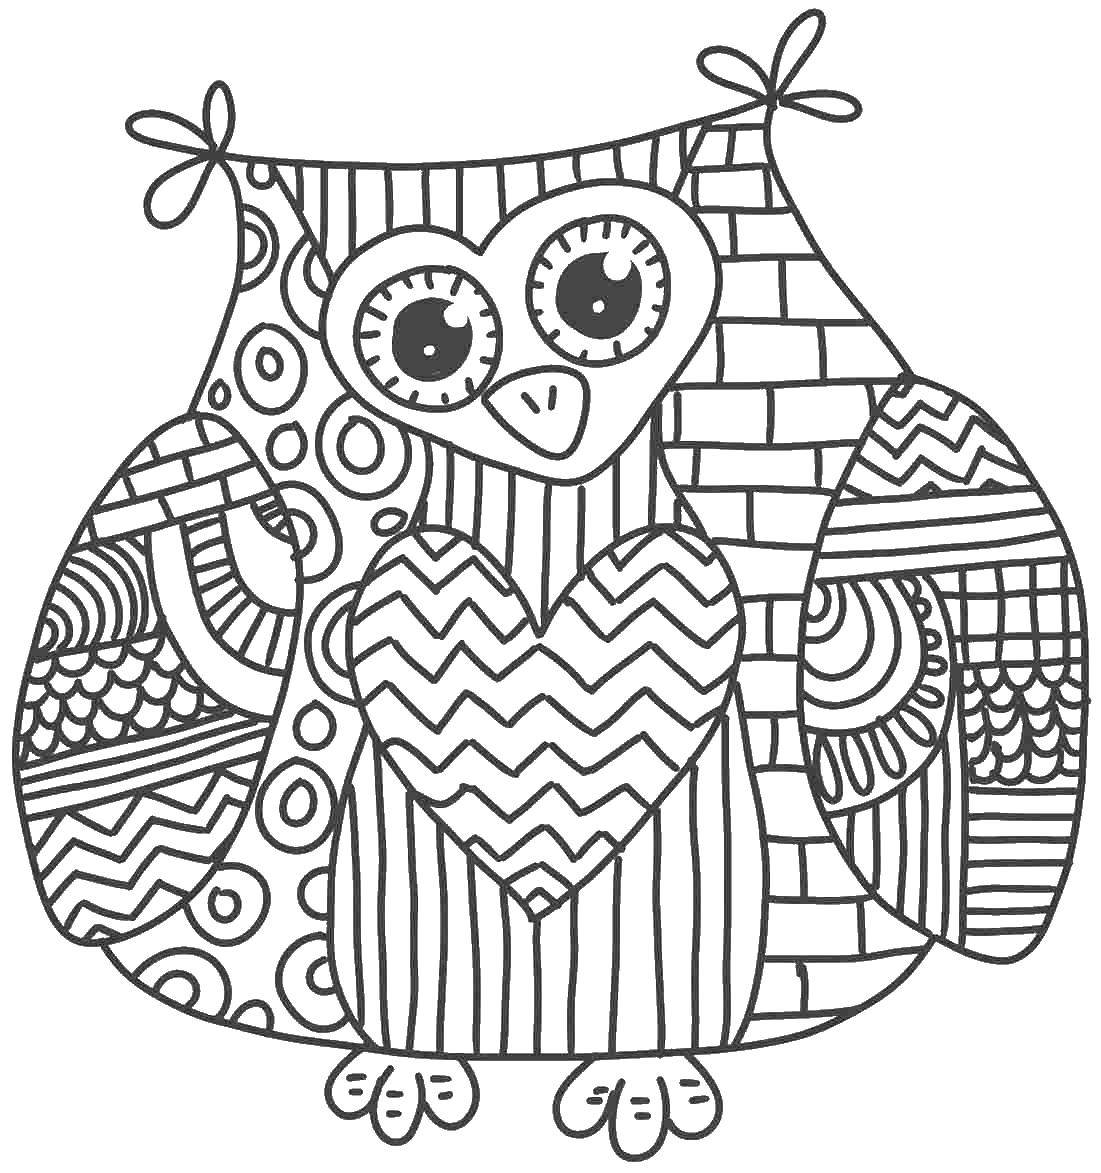 Coloring Owl patterns. Category night birds. Tags:  owl, eyes, patterns.